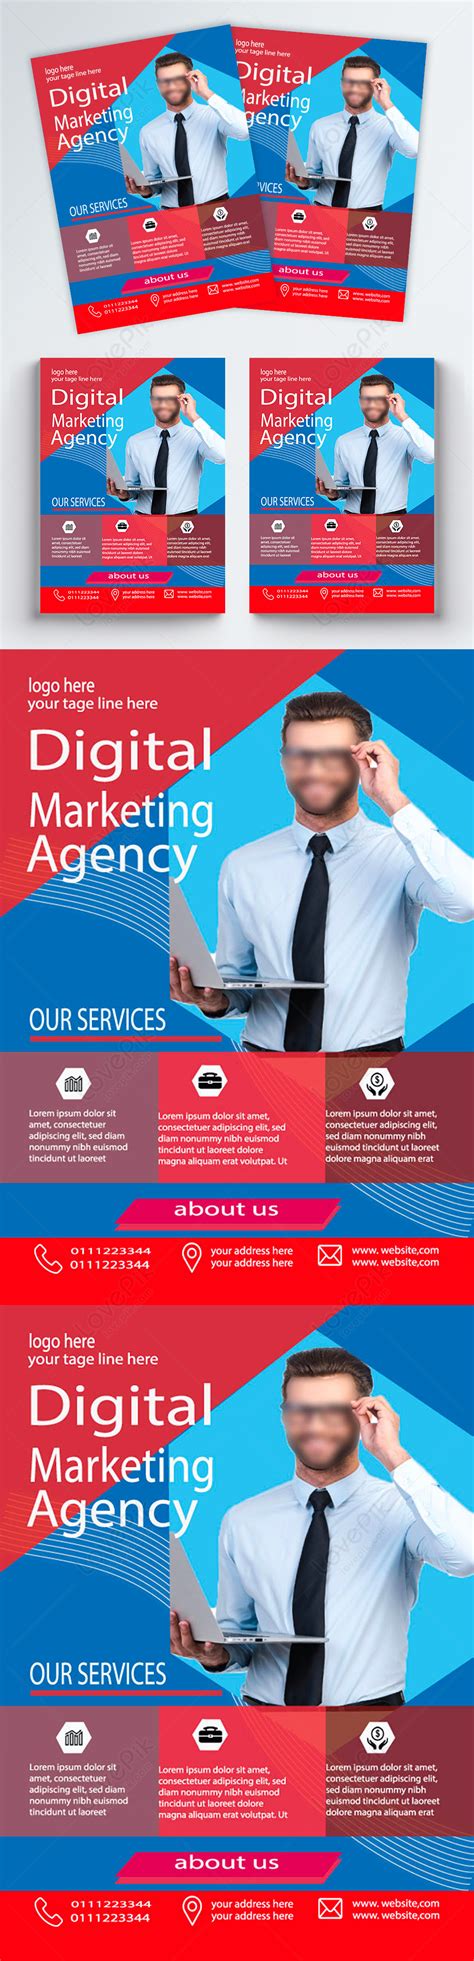 Creative Digital Marketing Agency Flyer Template Imagepicture Free